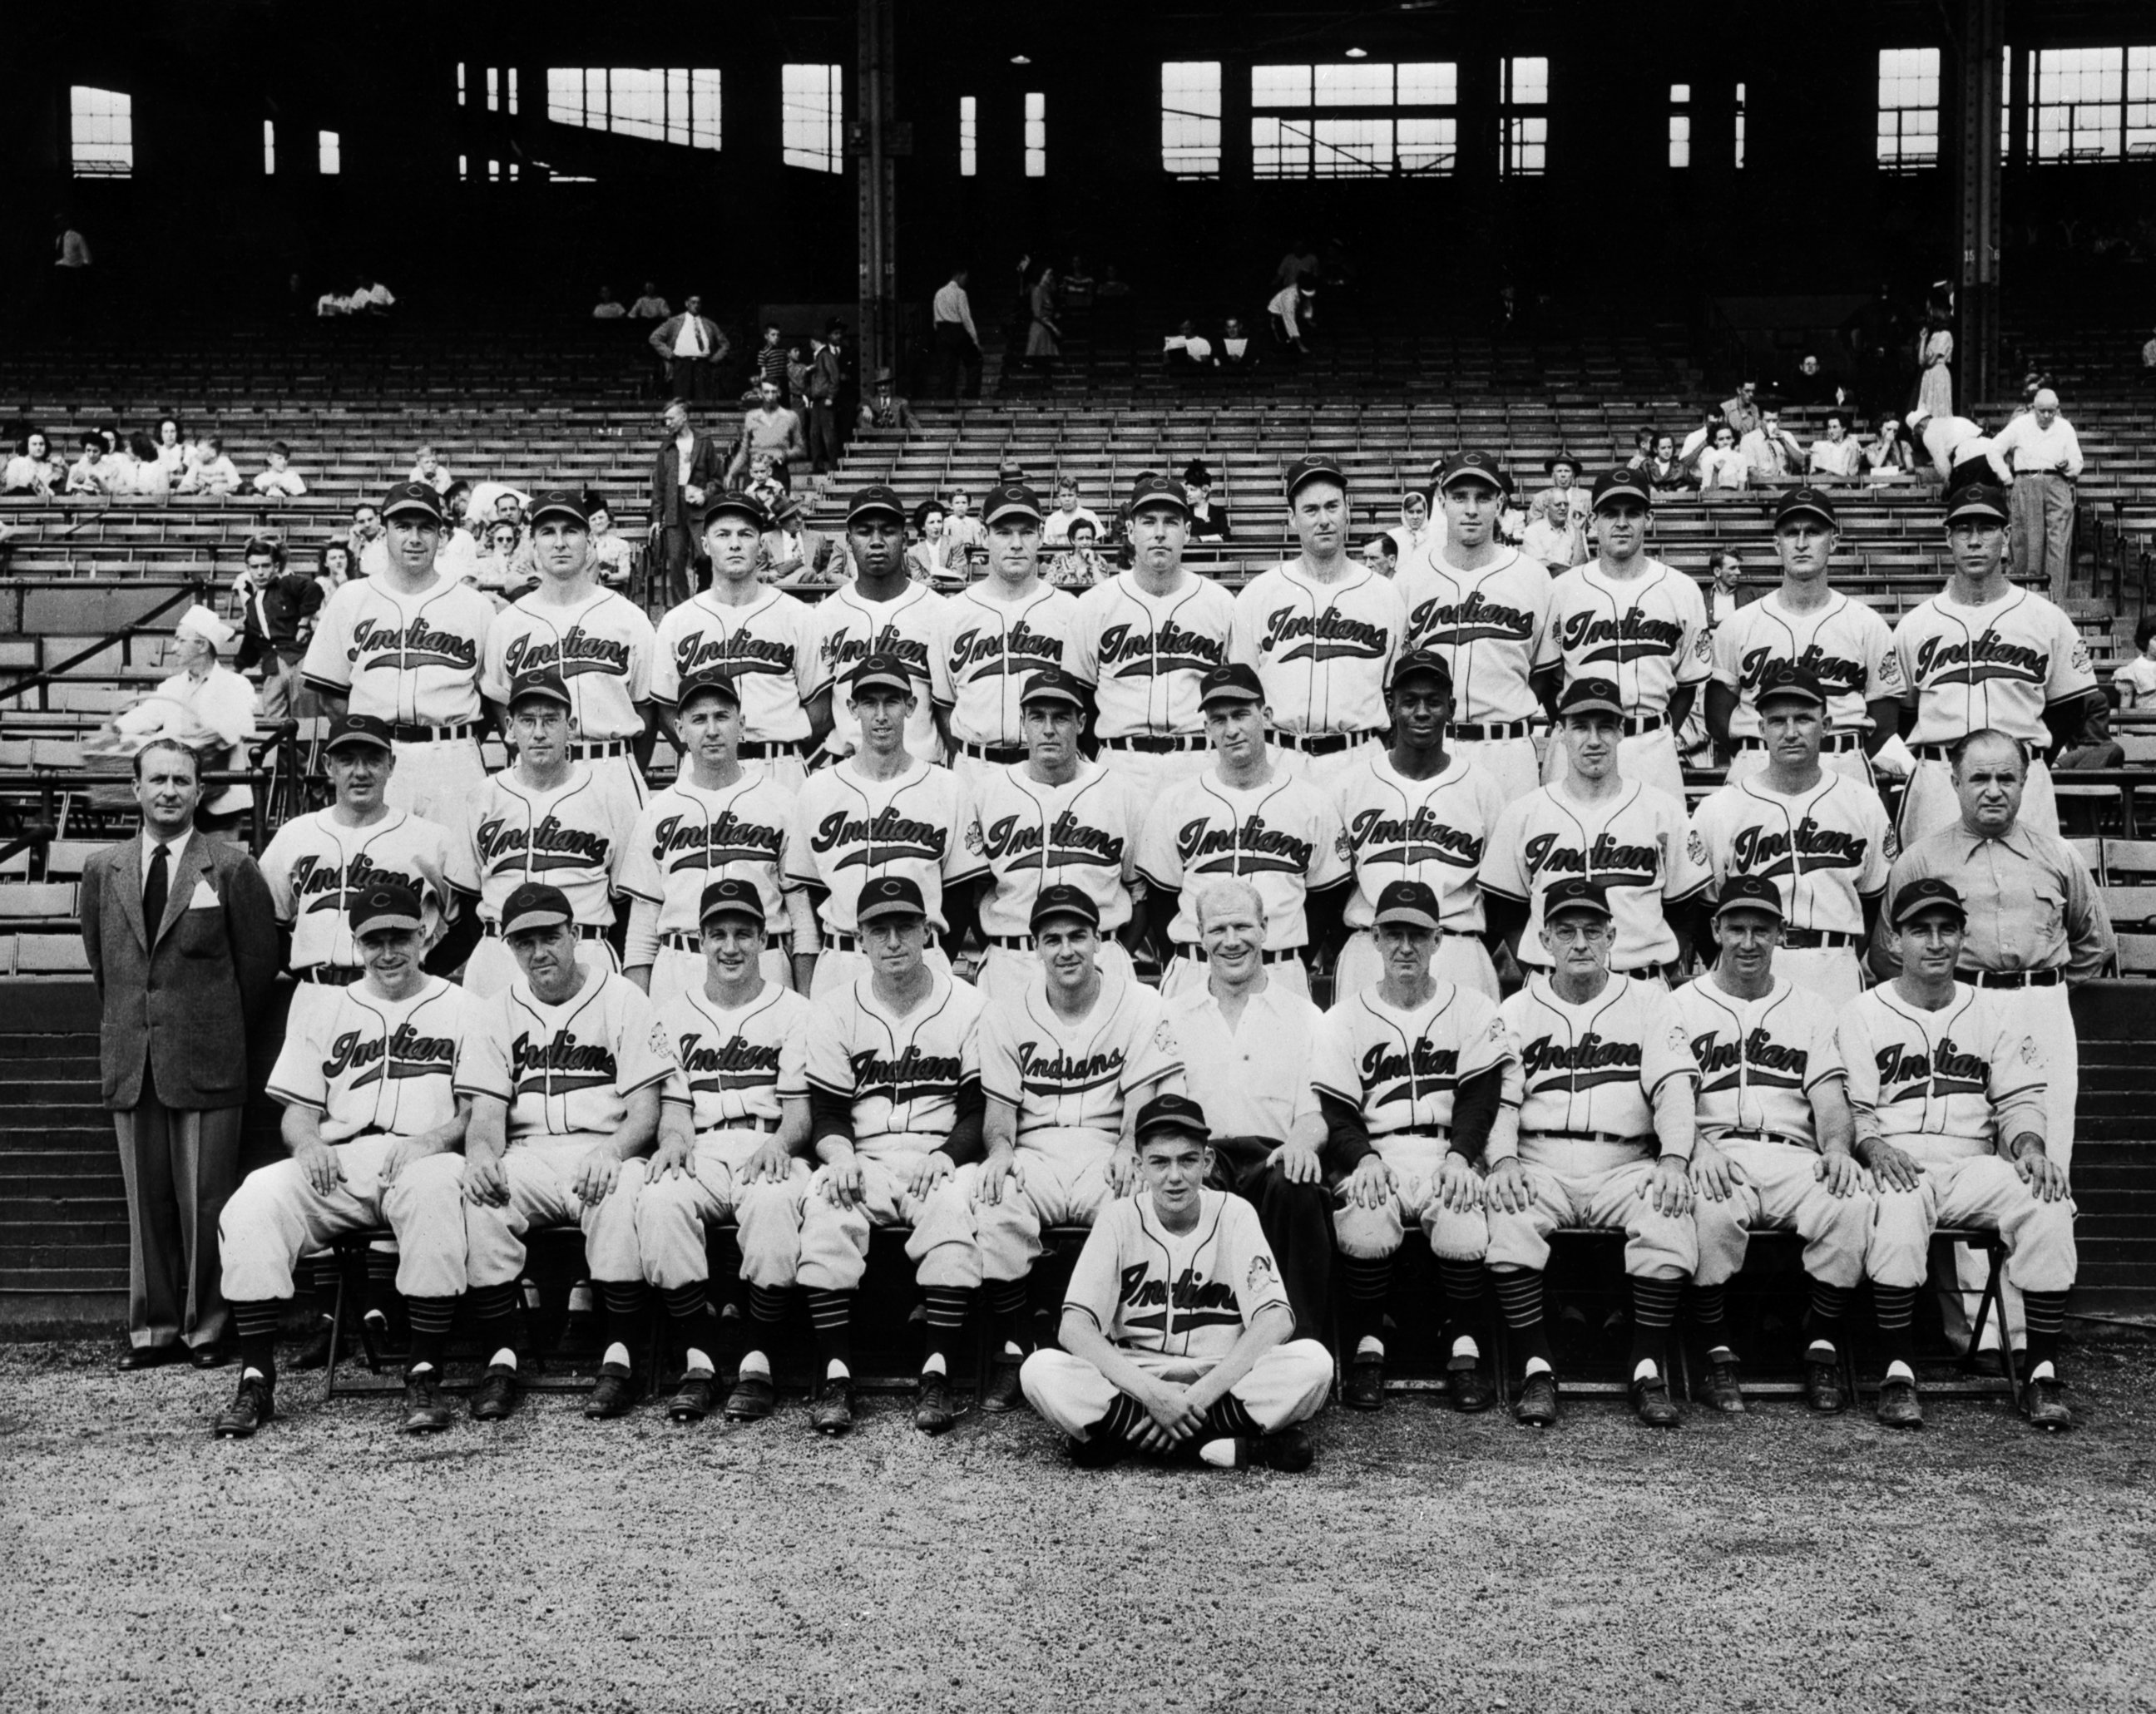 PHOTO: Team photo showing the American League contenders for the 1948 World Series, the Cleveland Indians.